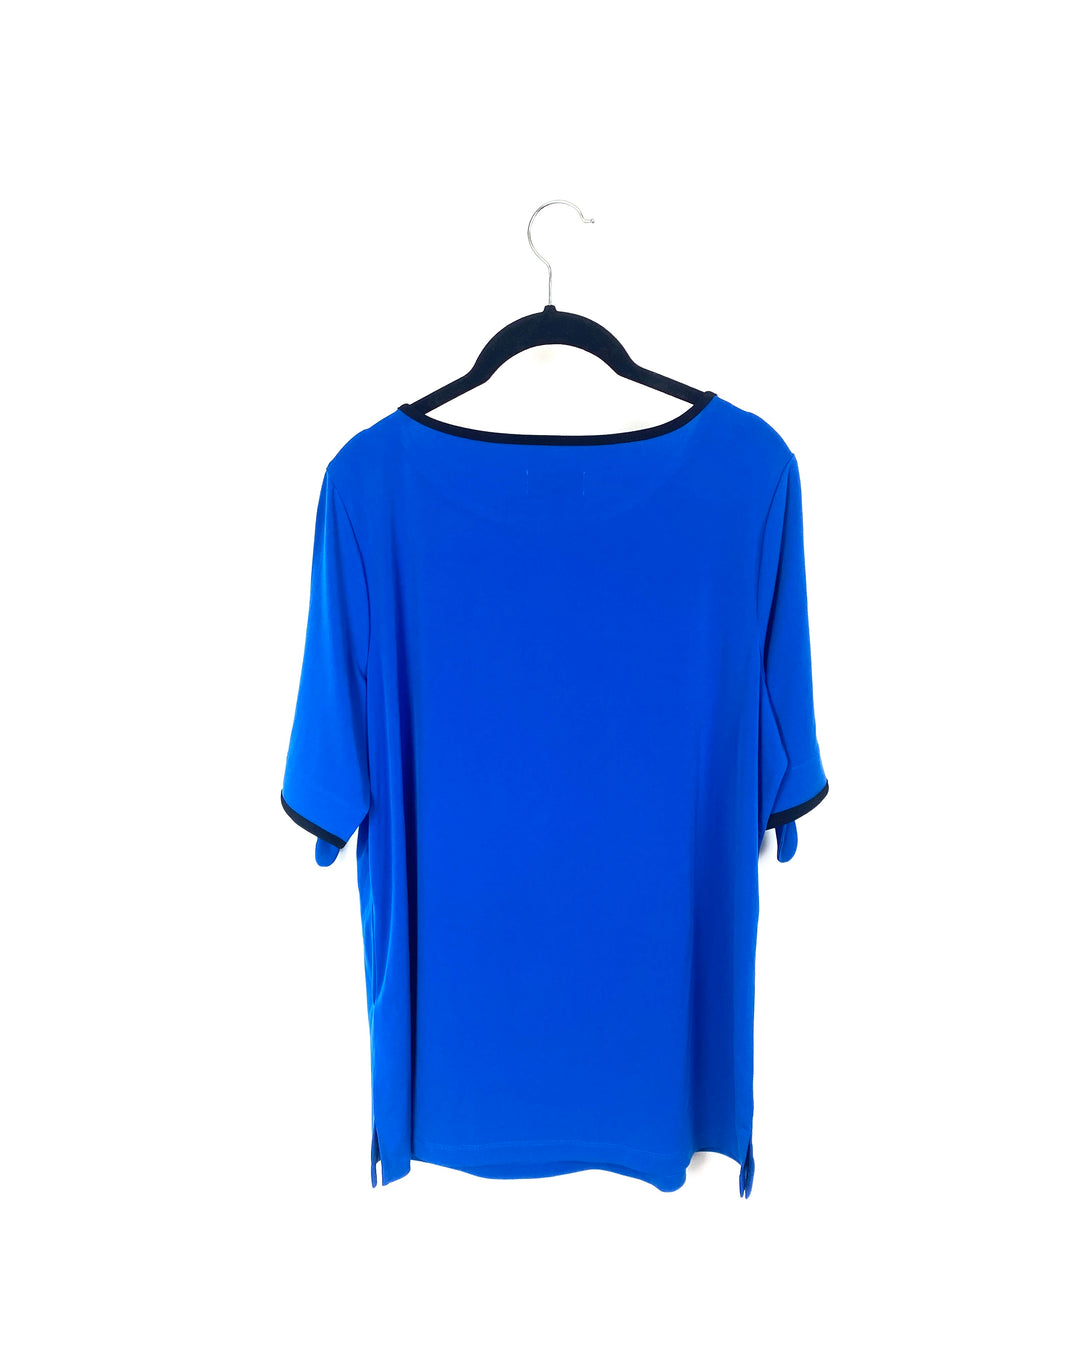 Blue Short Sleeve Top with Bows - Small/Medium